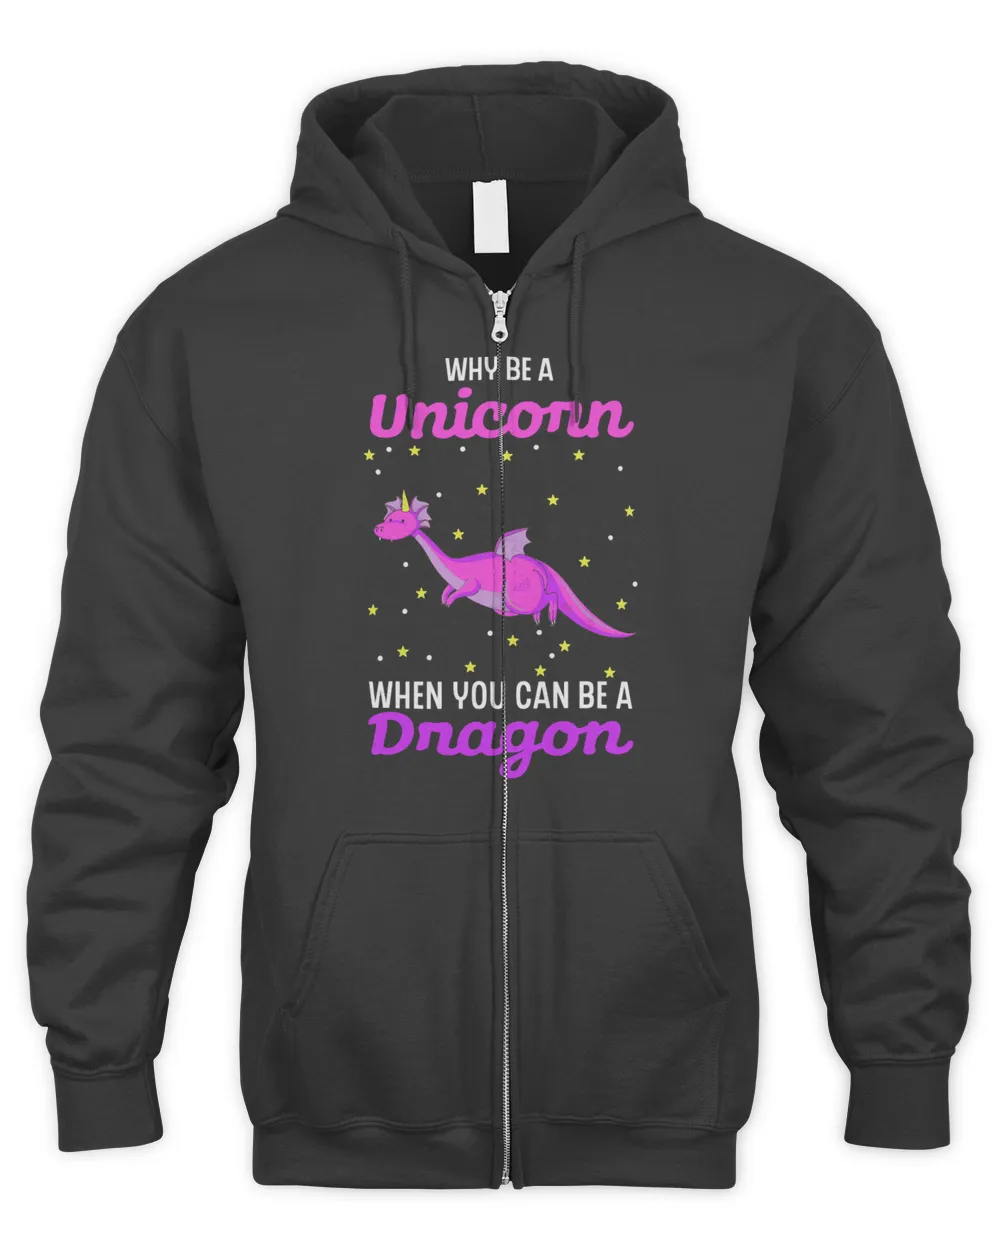 why be a unicorn when you can be a dragon magical creature